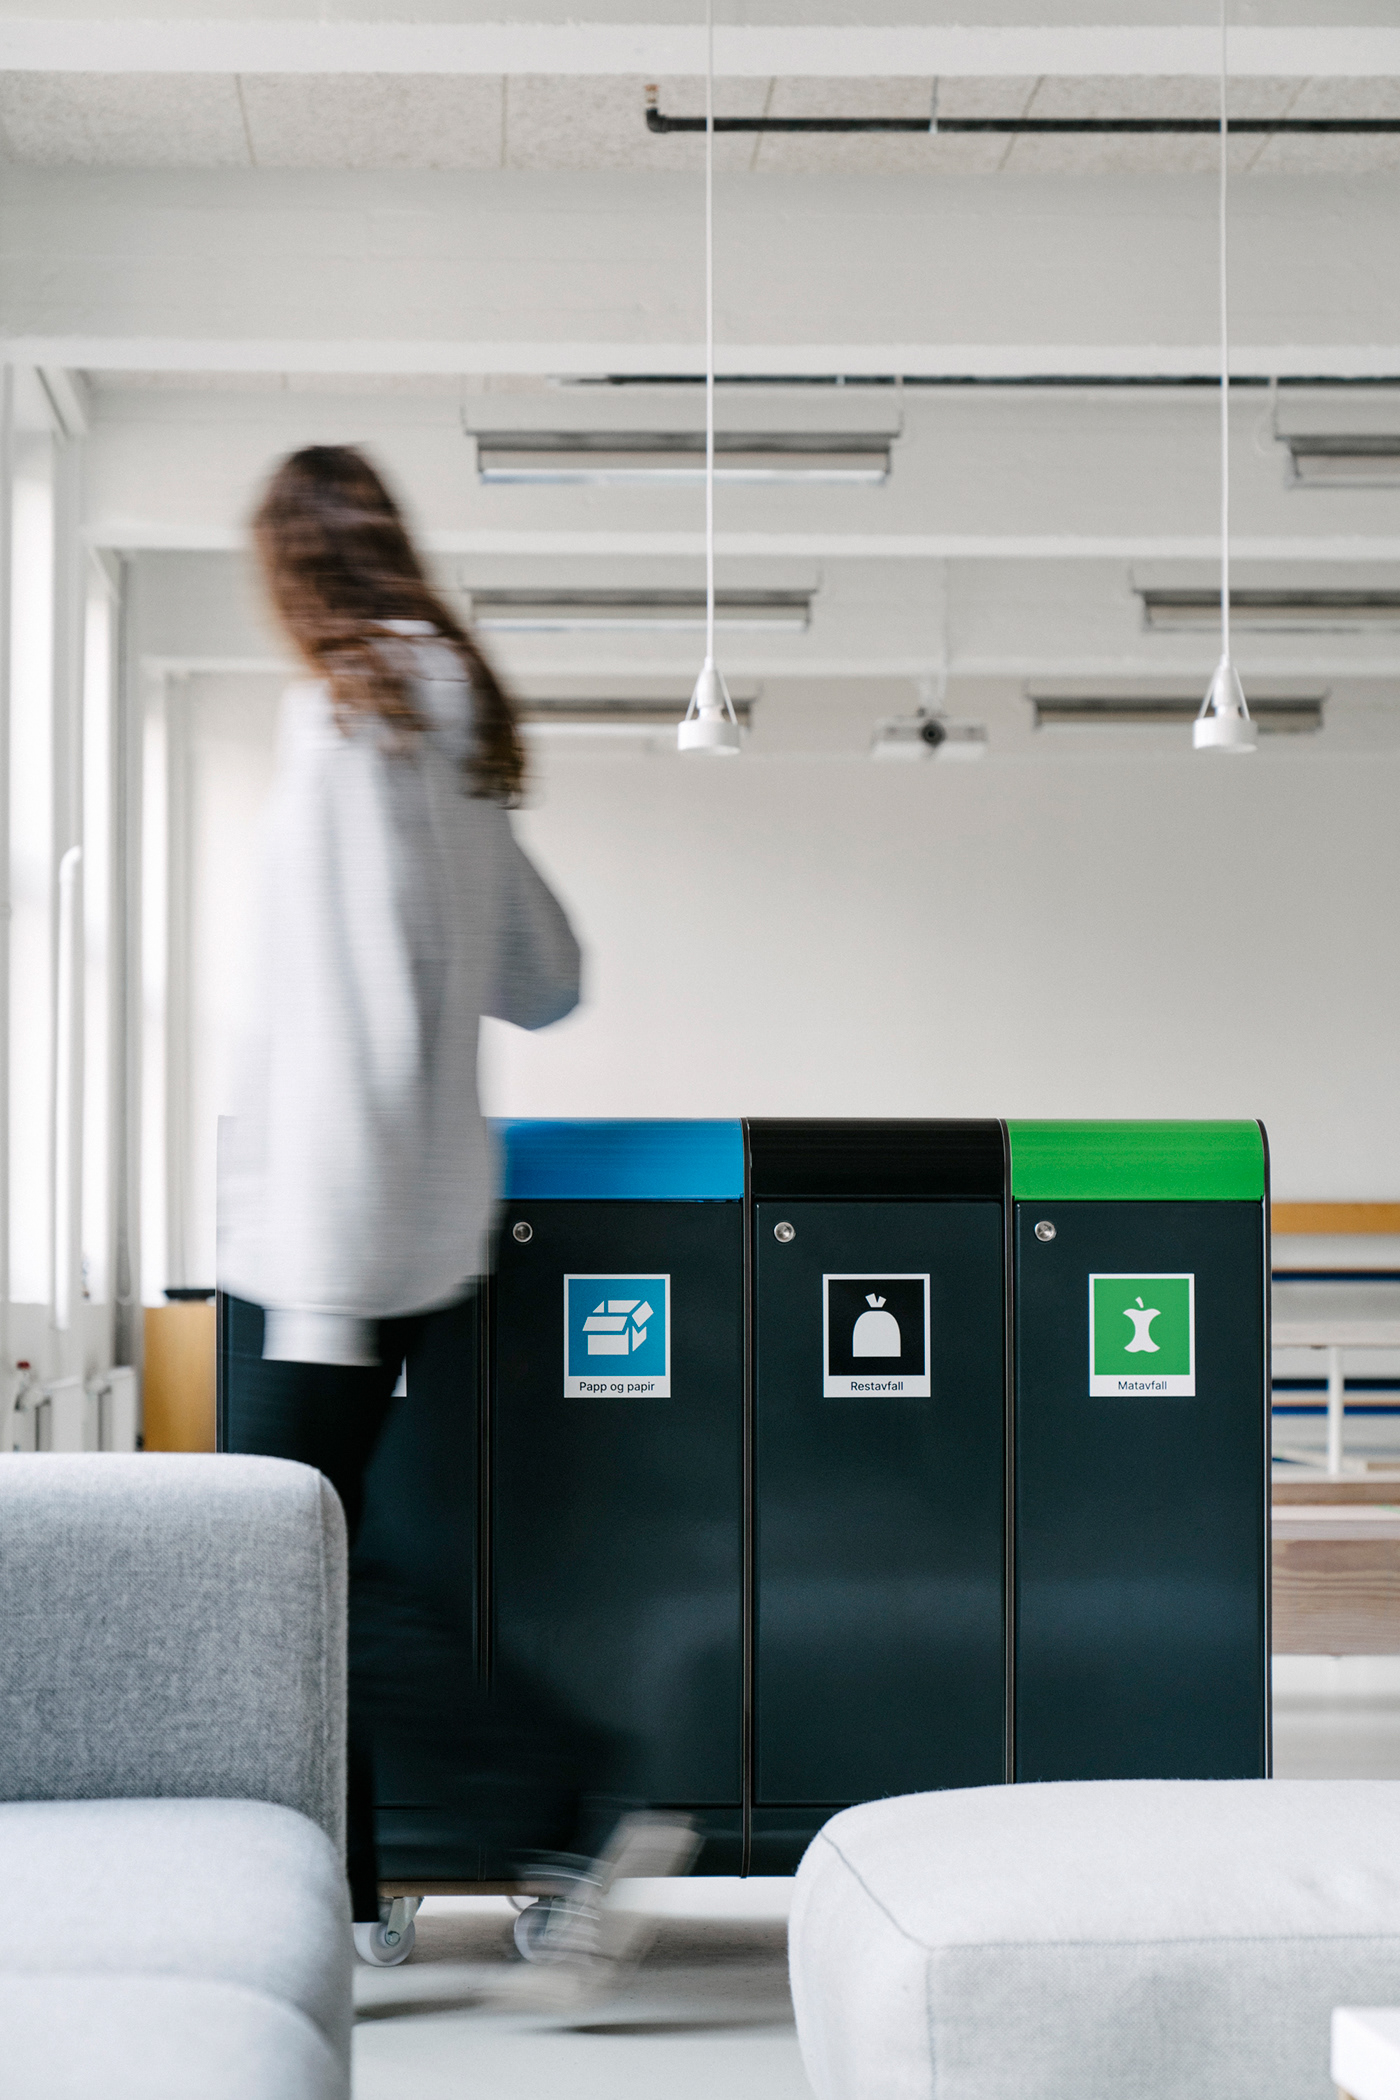 icons recycling system pictograms rational waste